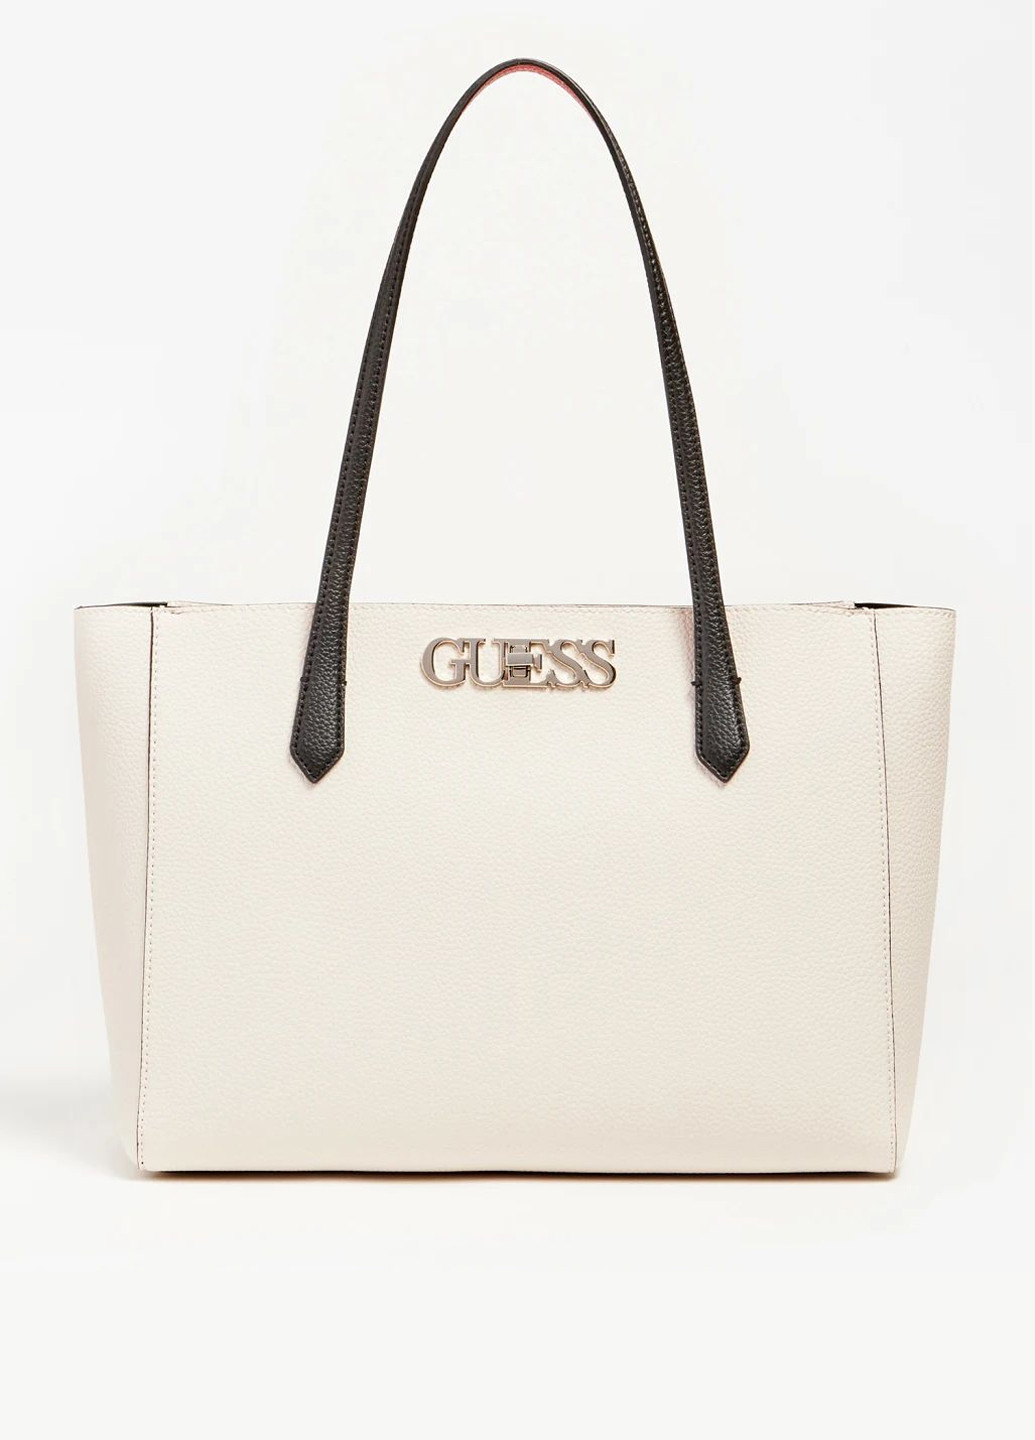 Сумка Guess uptown chic elite tote (239103643)